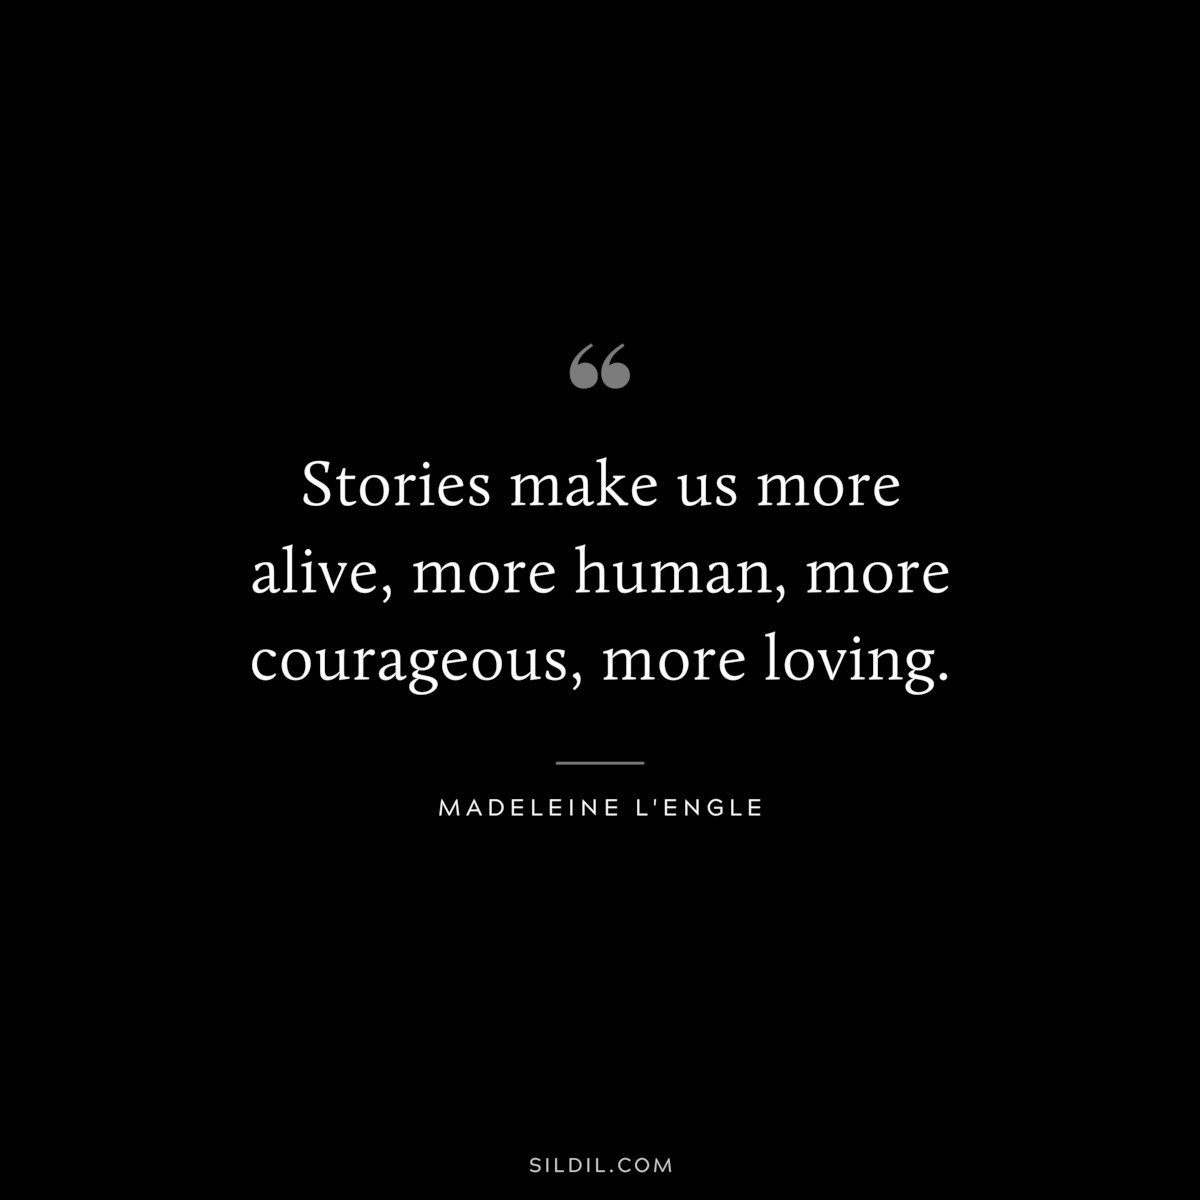 Stories make us more alive, more human, more courageous, more loving. ― Madeleine L'Engle